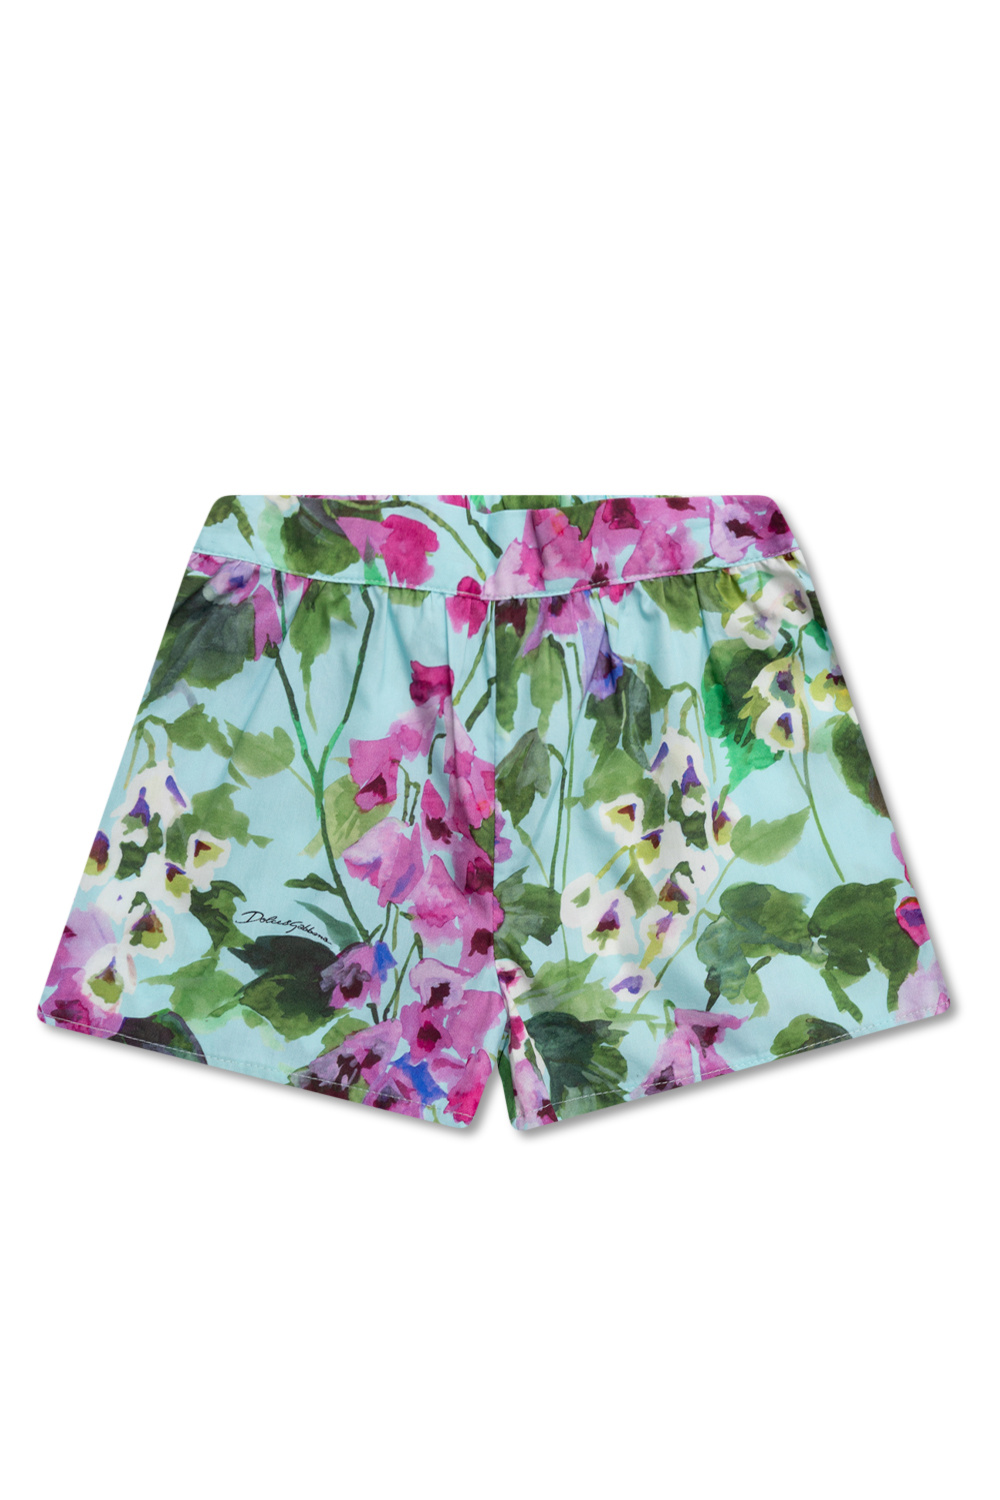 Dolce & Gabbana Kids Shorts with floral motif